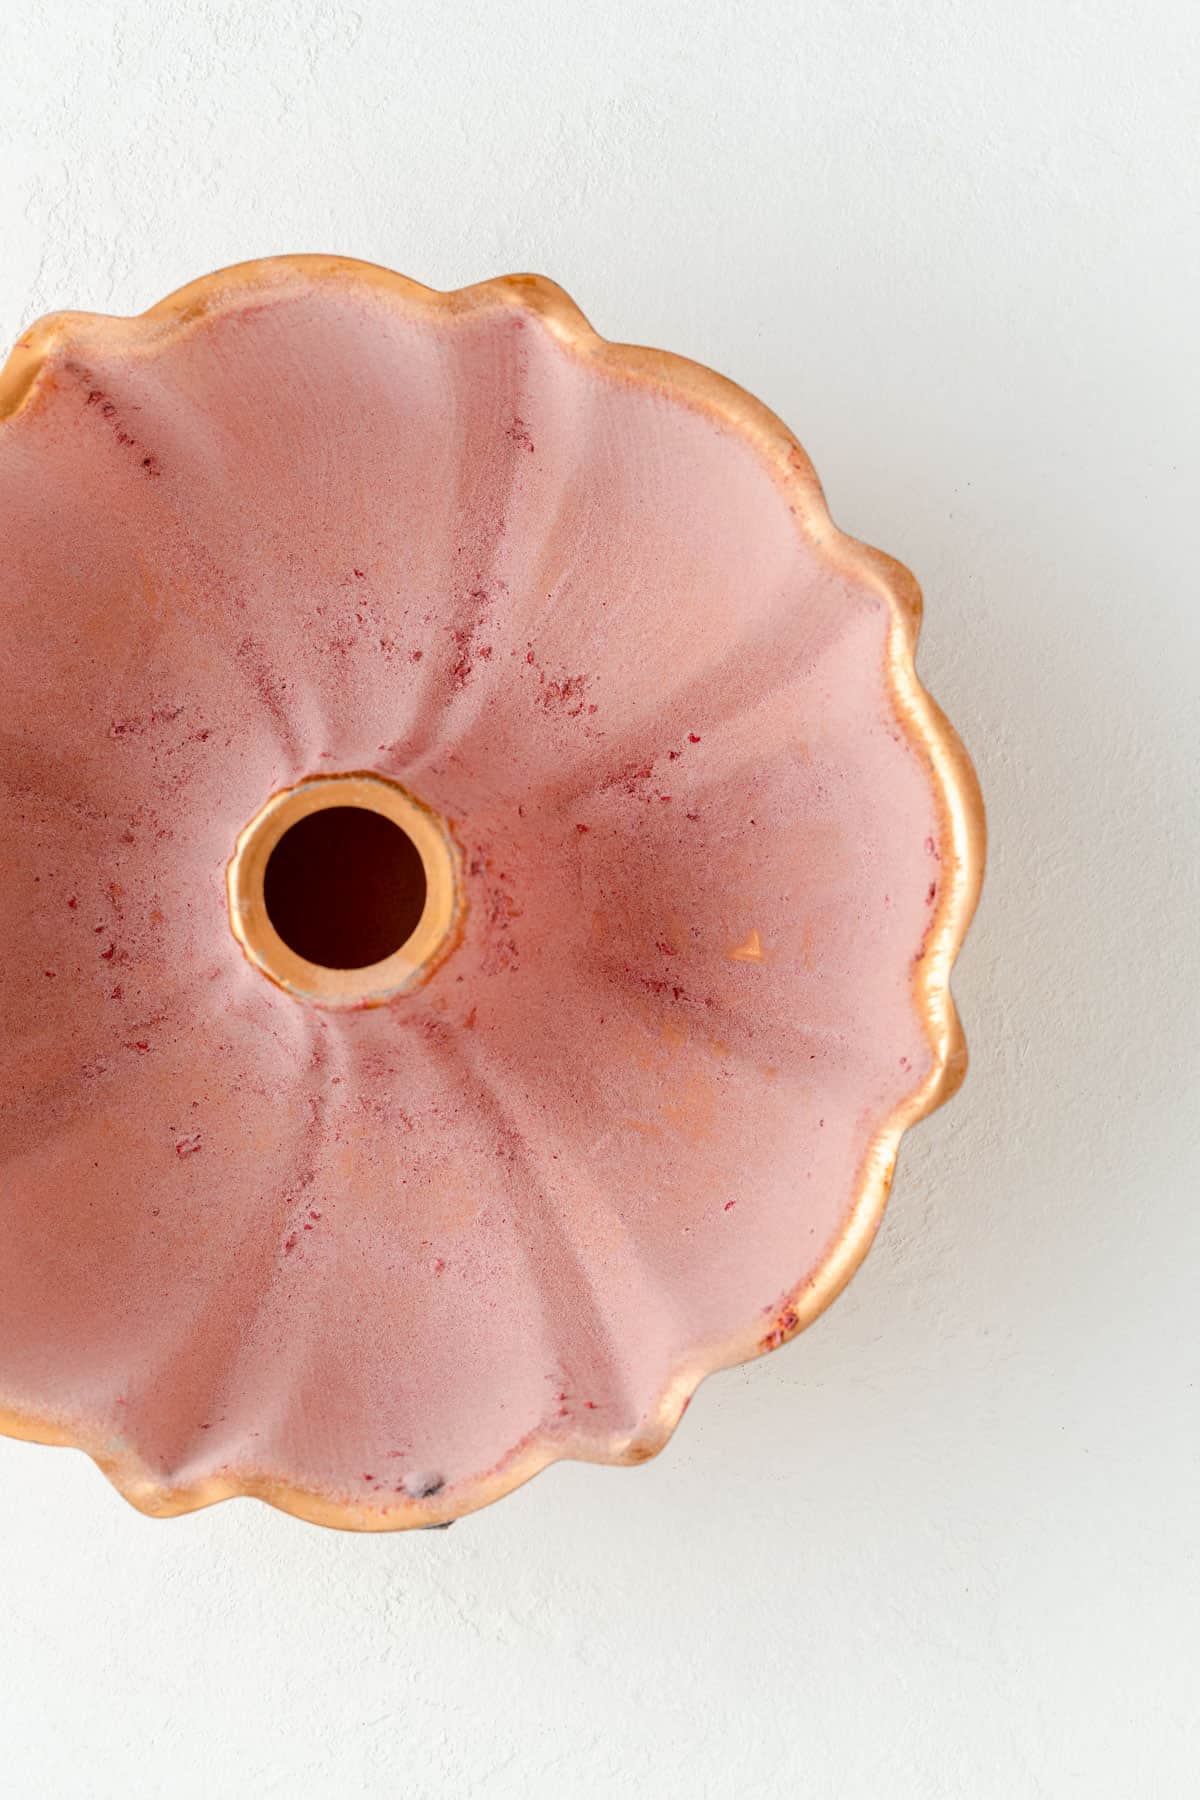 Raspberry flour dusted copper Bundt pan on a white background.